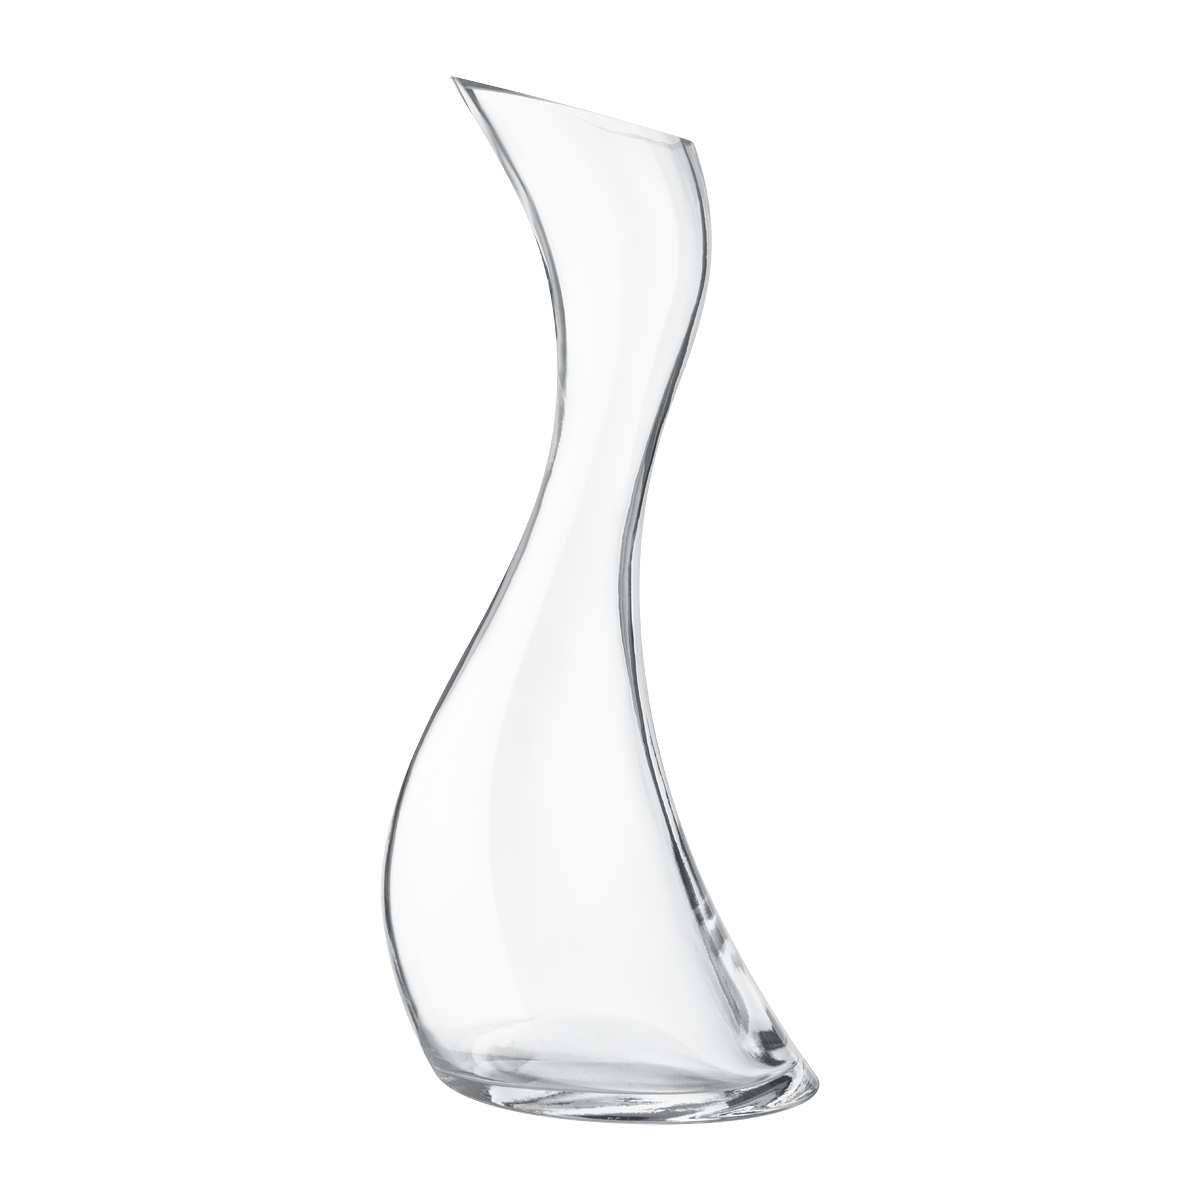 Primary image for Cobra by Georg Jensen Glass Carafe Pitcher - New - 3586612